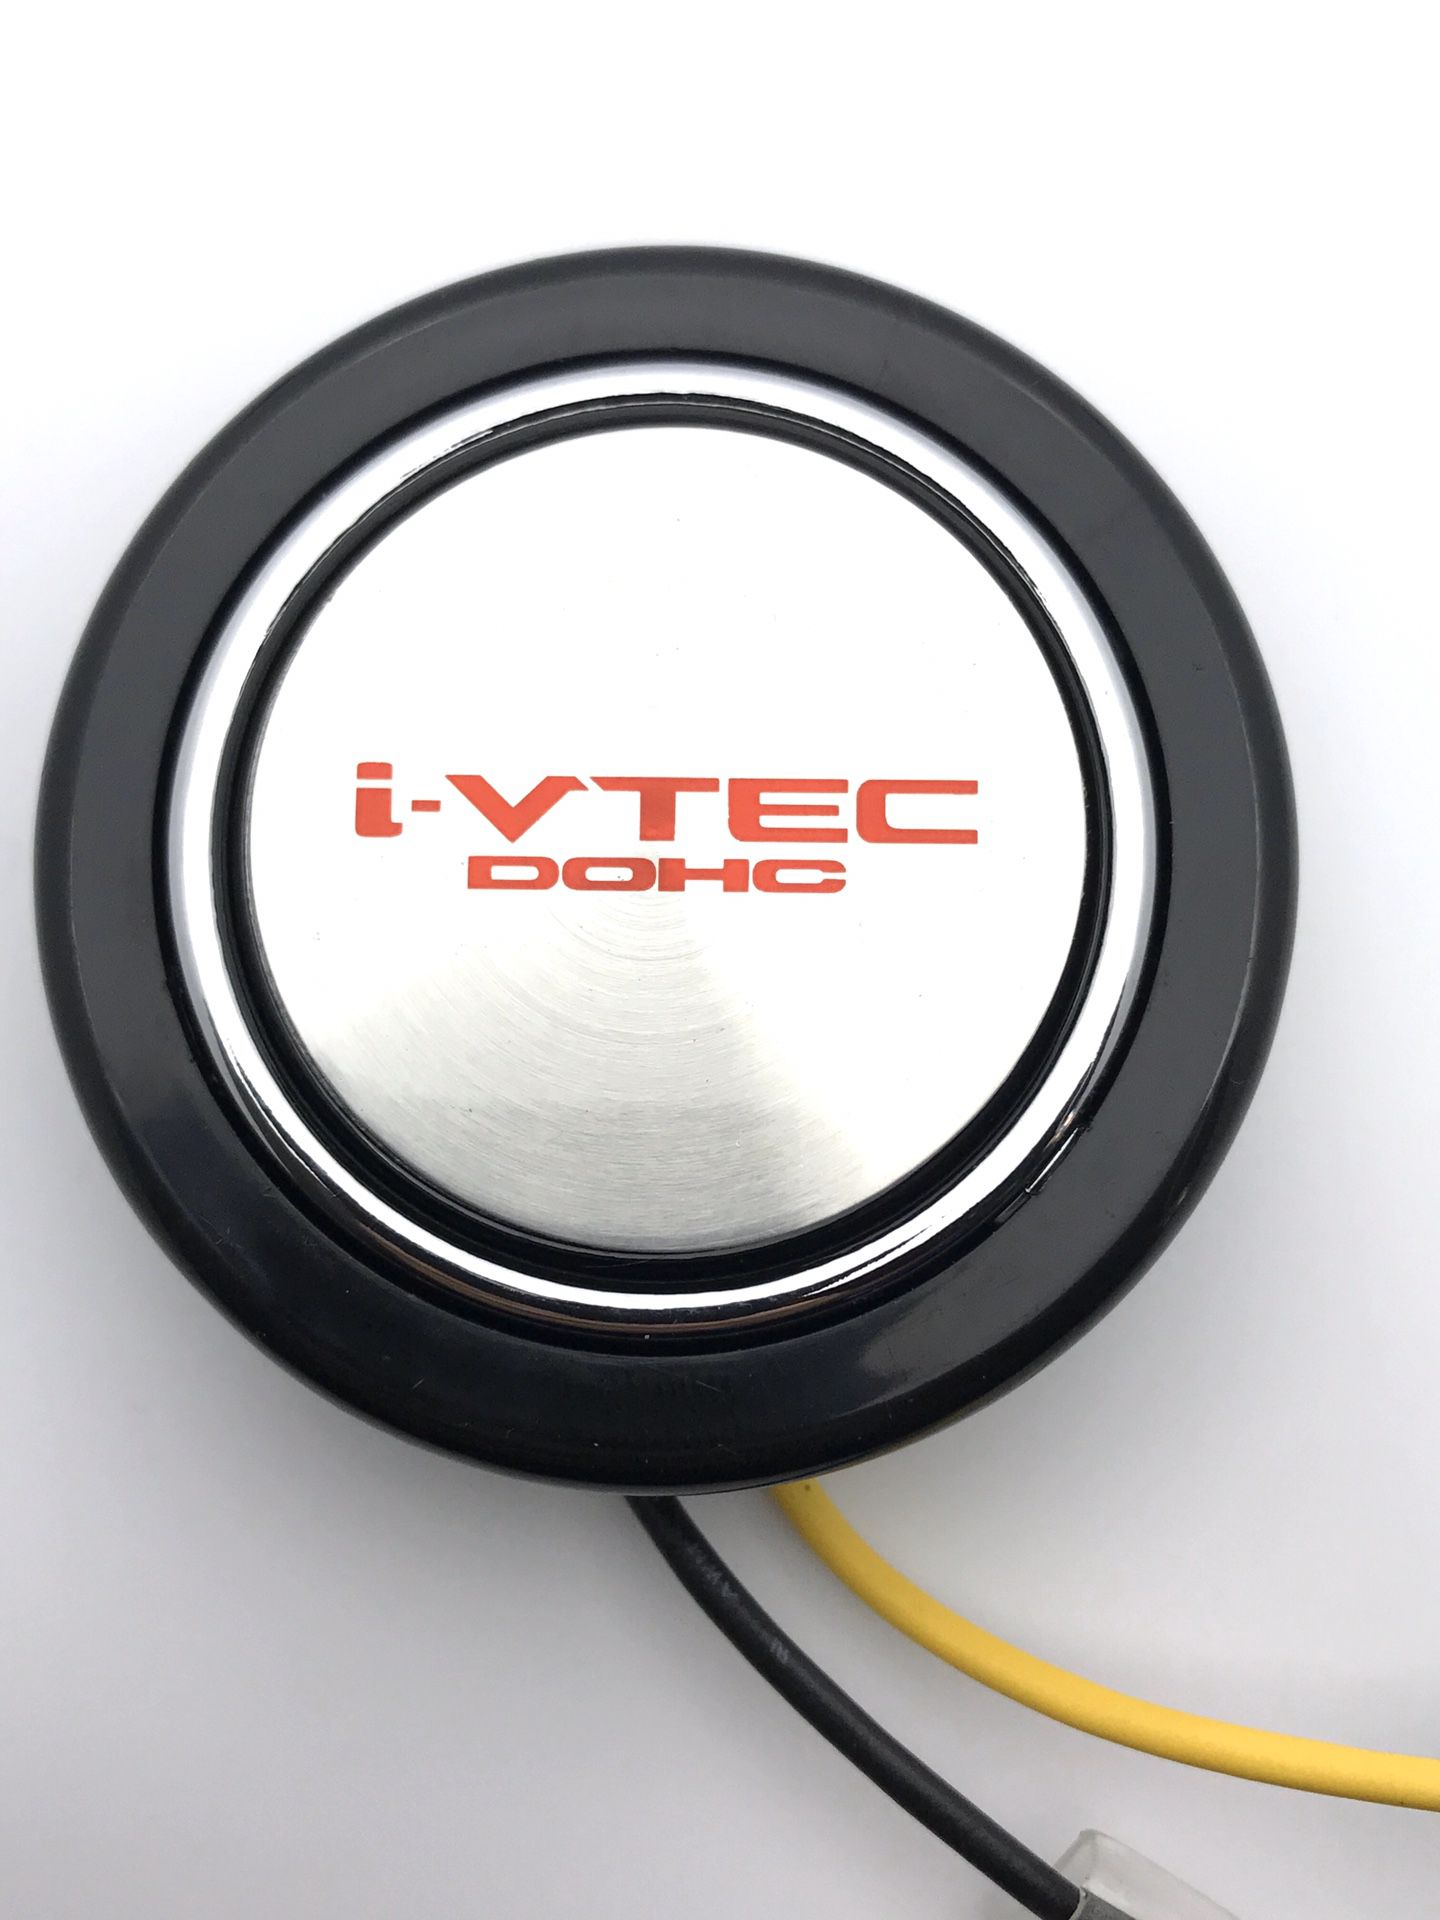 ivtec Horn Button for Aftermarket Steering Wheels Like NRG Nardi Grant VMS Sparco and more